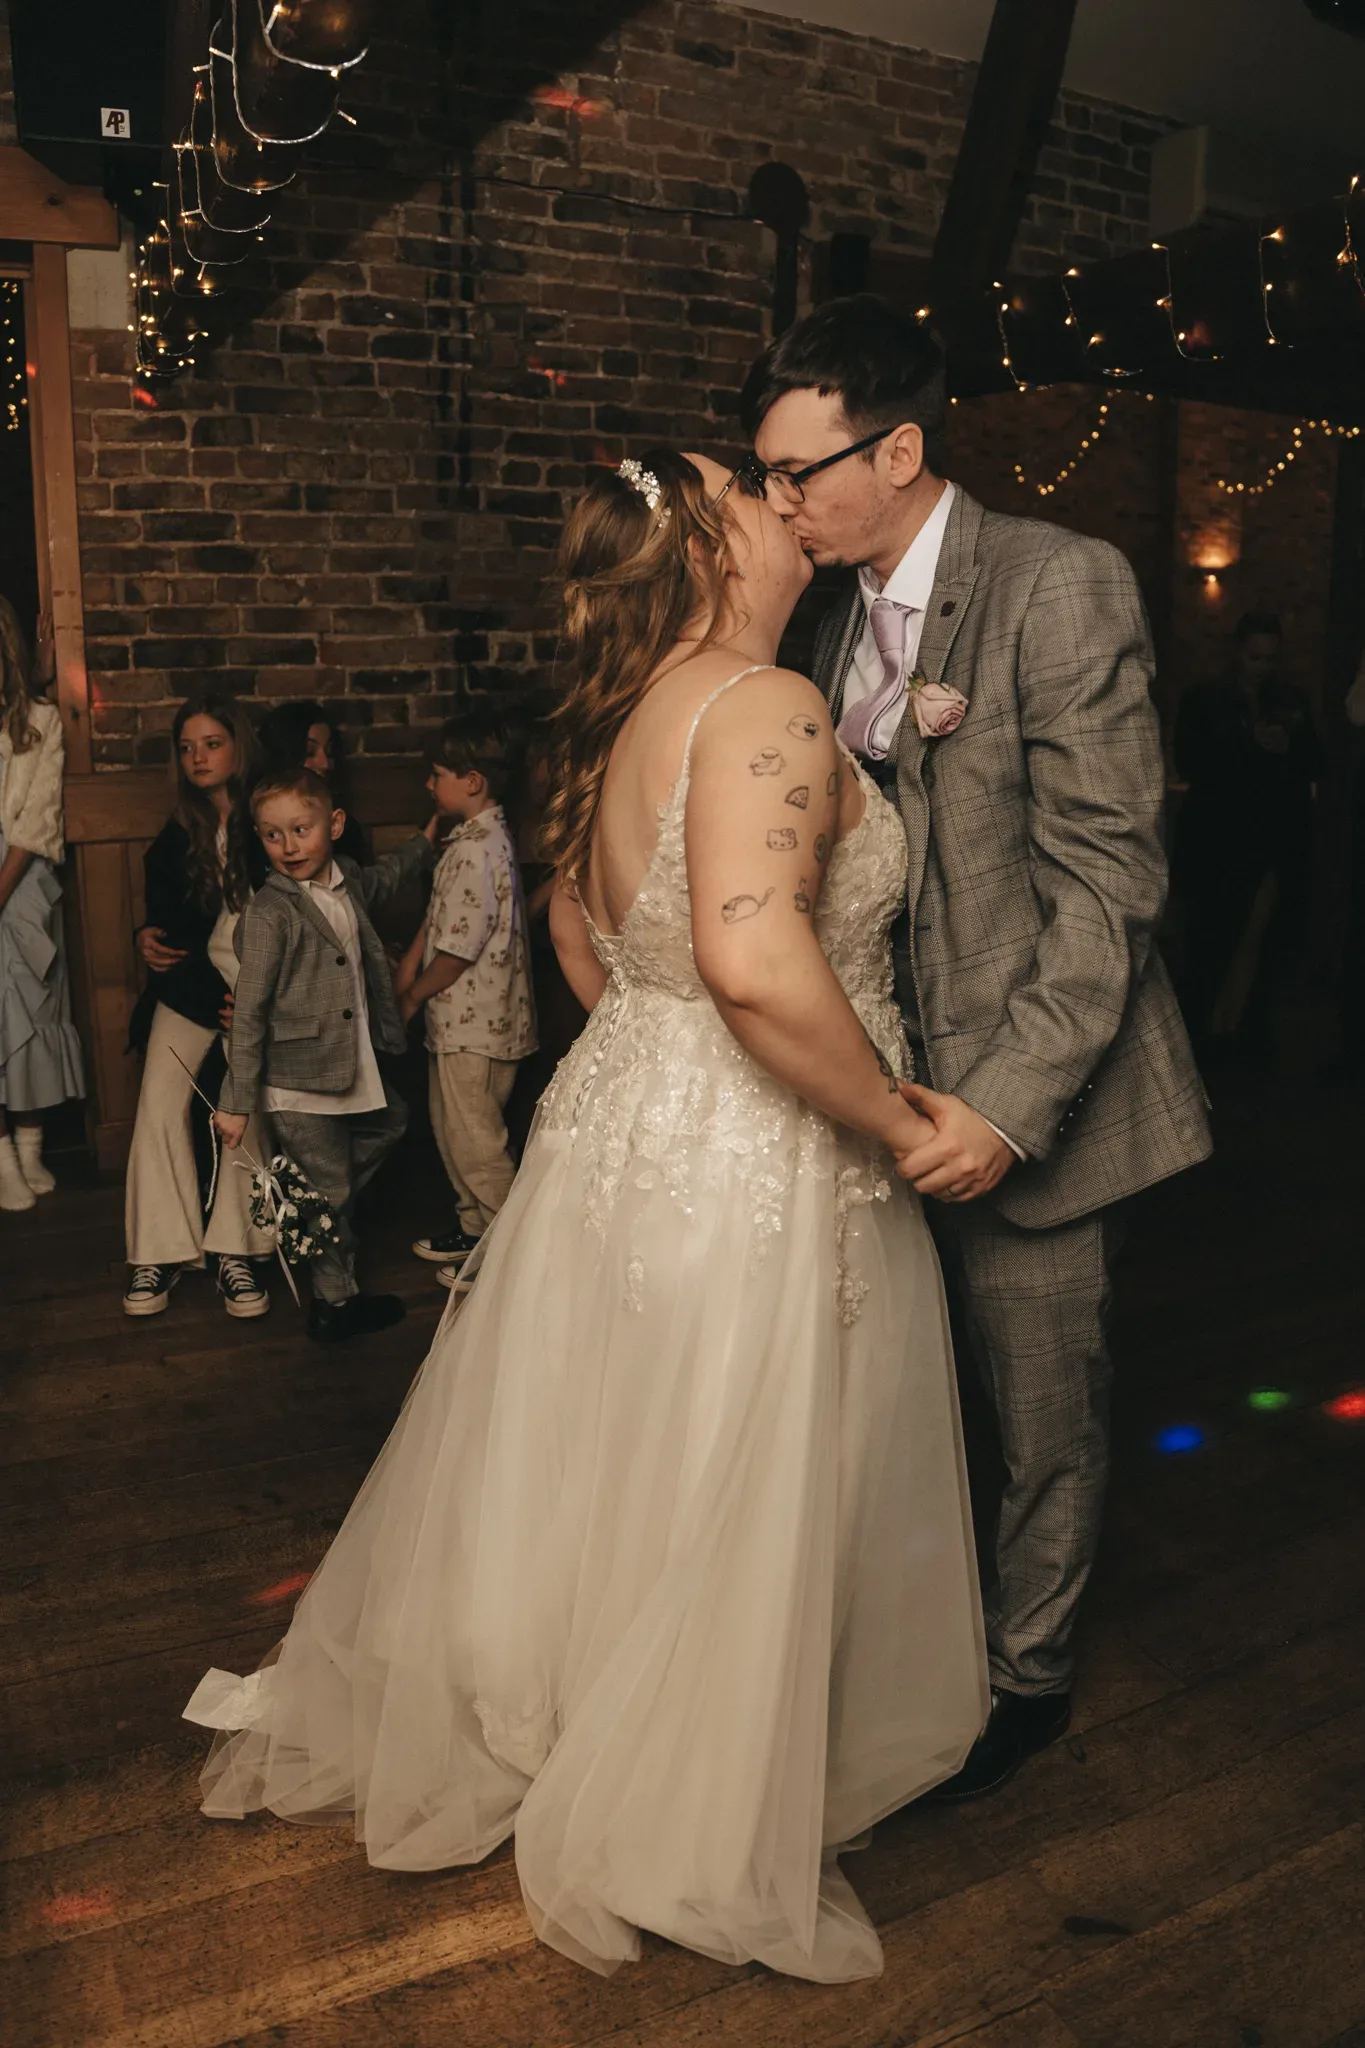 A couple in wedding attire share a romantic dance, their kiss capturing a moment of love, whilst children look on in the warmly lit, rustic reception space.